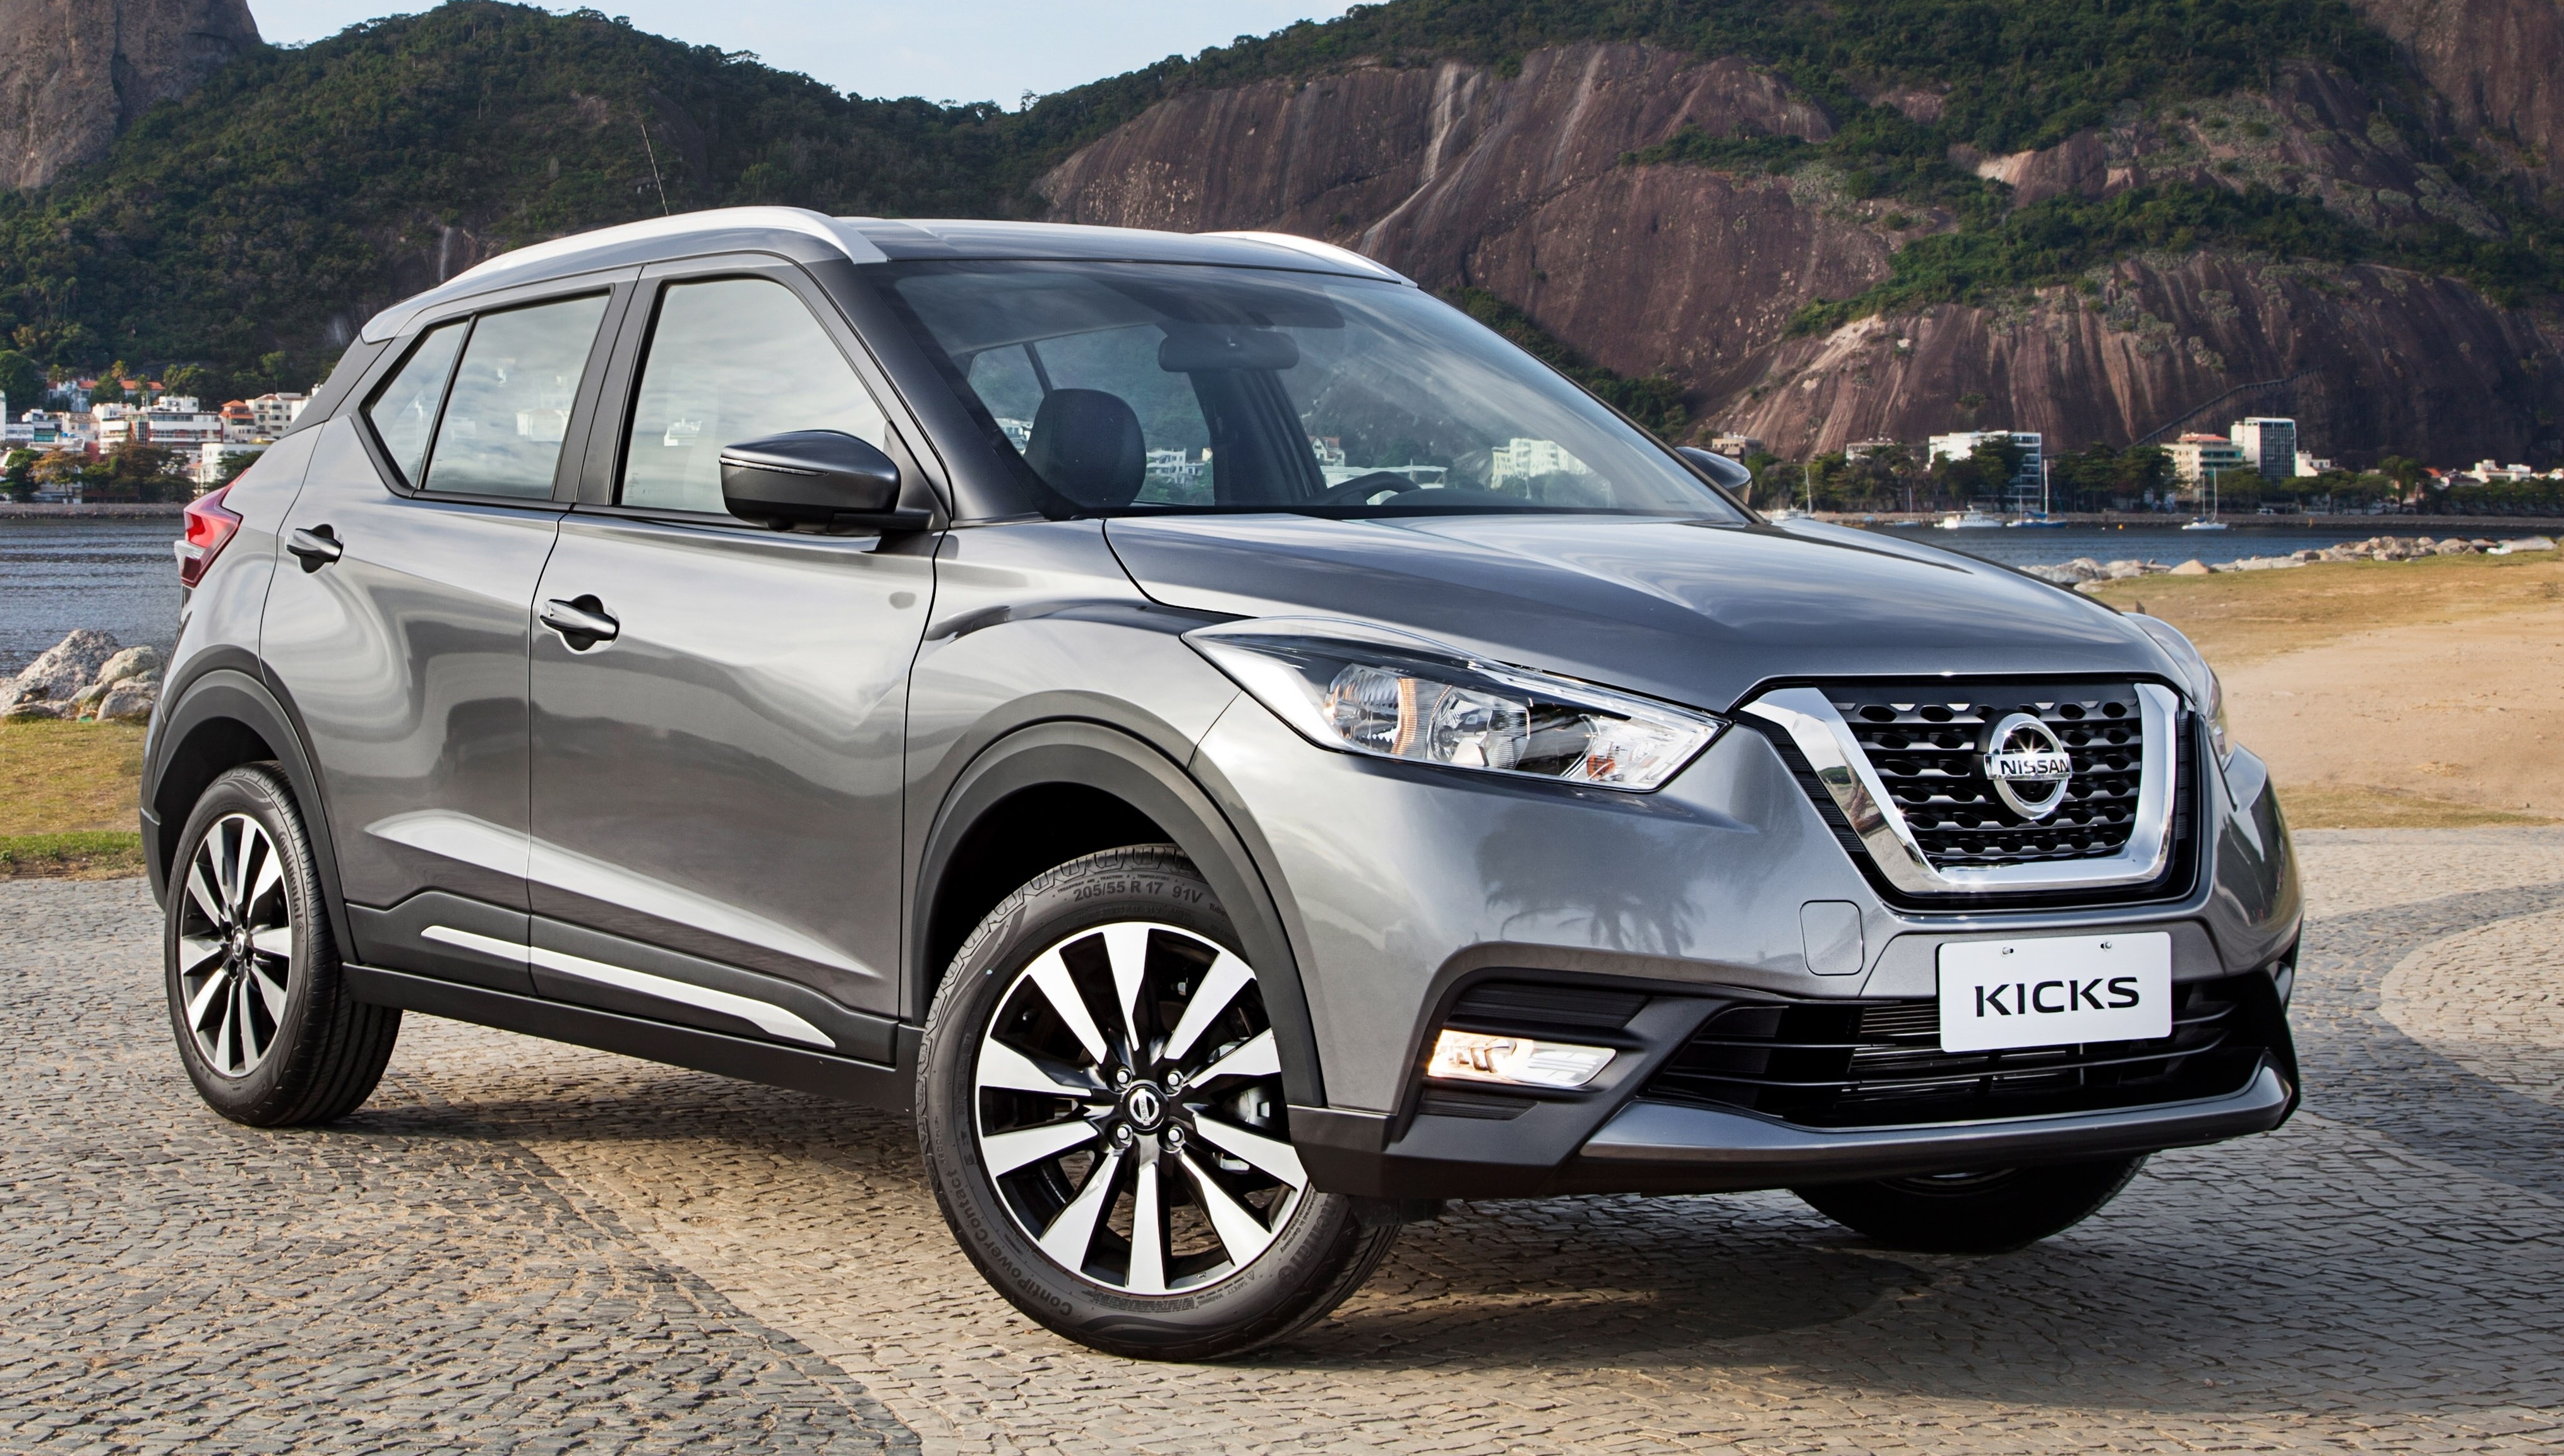 Nissan Kicks Brazil starts the ball rolling in August Image 525610